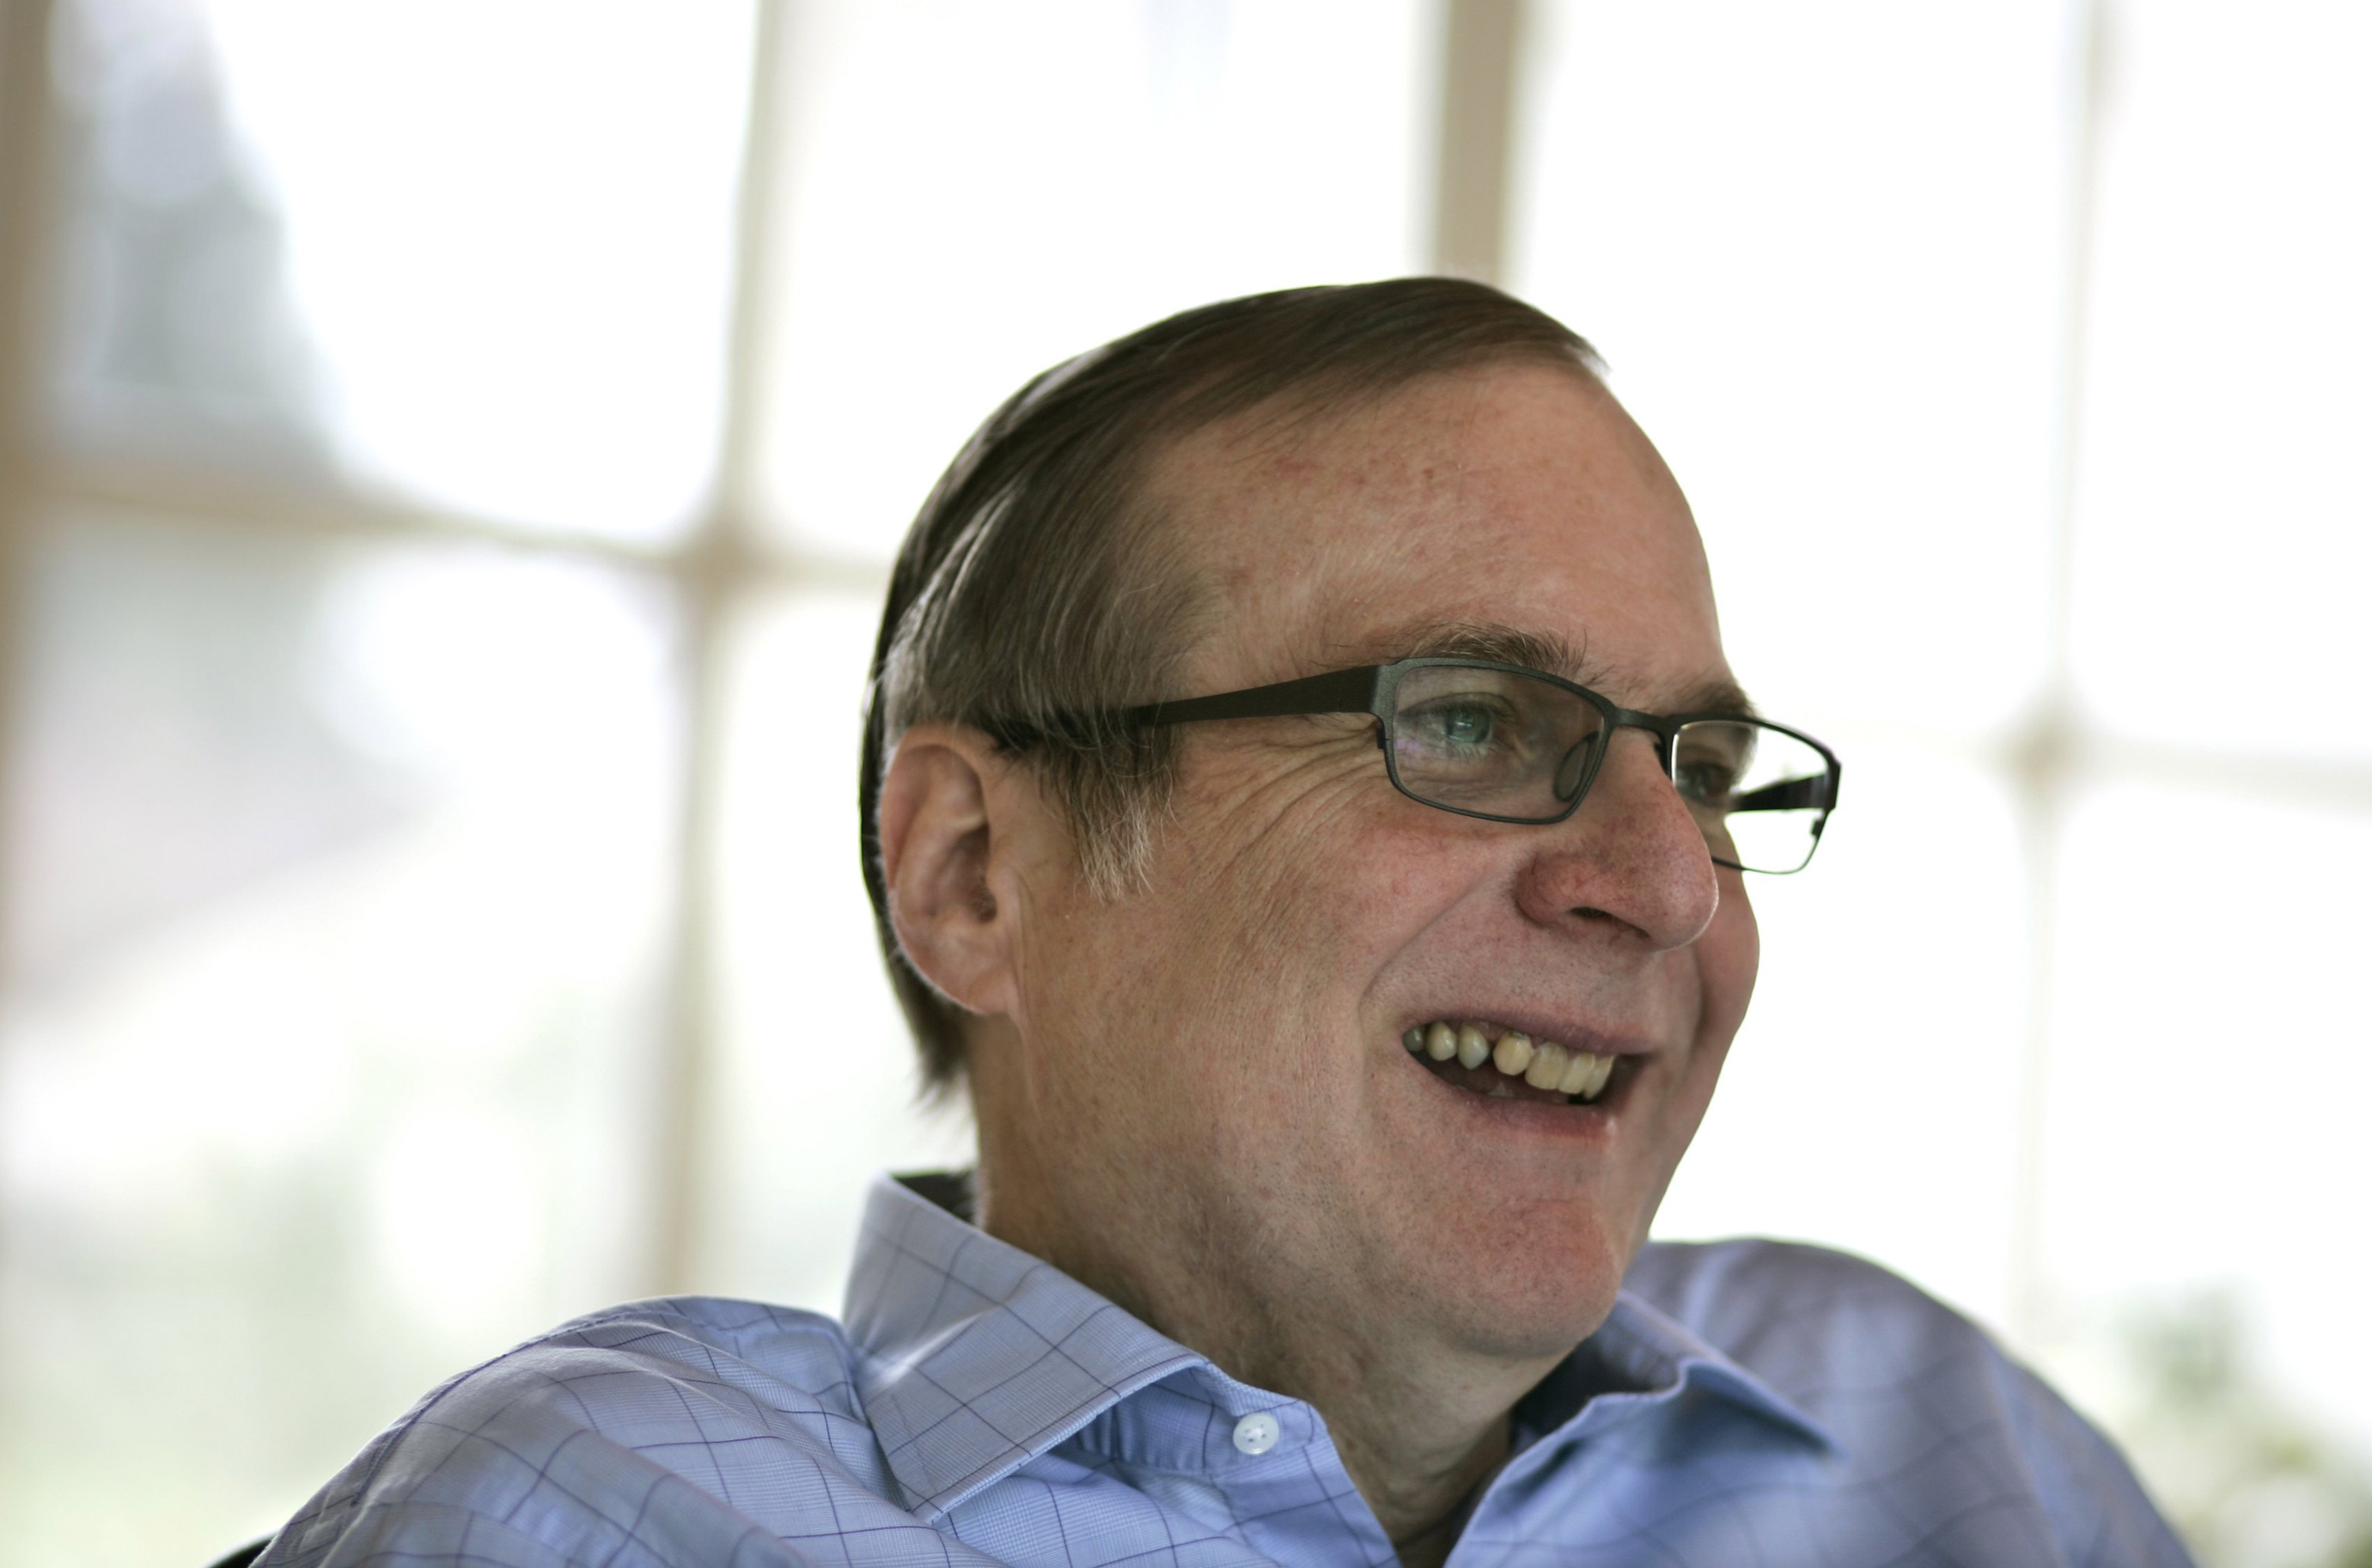 Paul Allen has had his share of strife, adventures